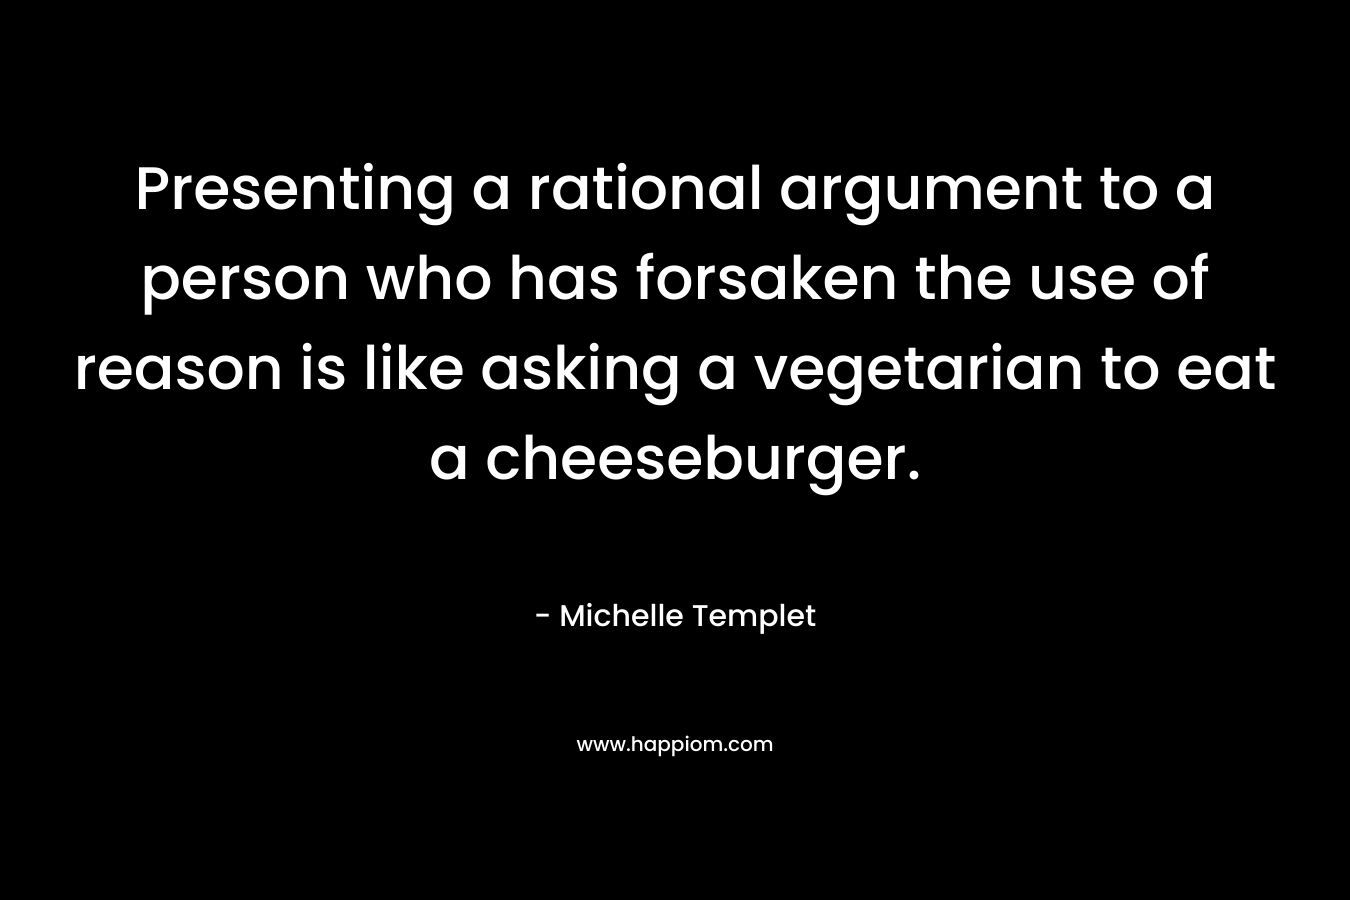 Presenting a rational argument to a person who has forsaken the use of reason is like asking a vegetarian to eat a cheeseburger.